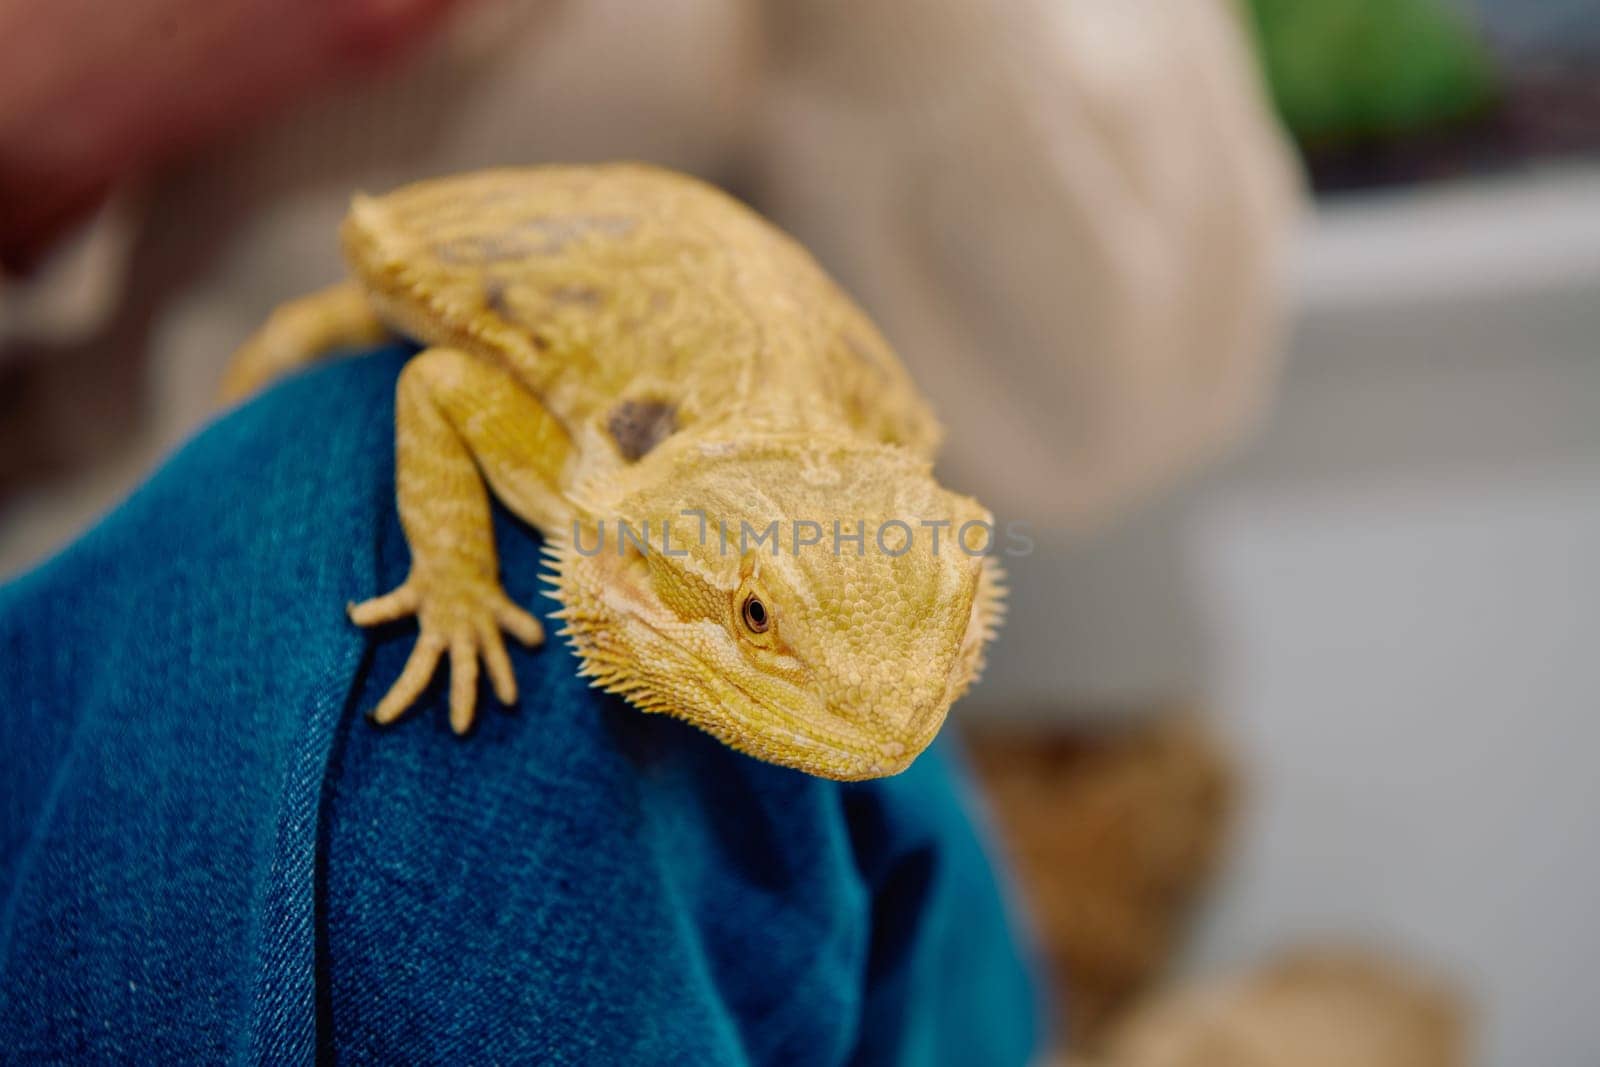 Bearded Dragon: A Close-Up Look at This Amazing Lizard by dotshock